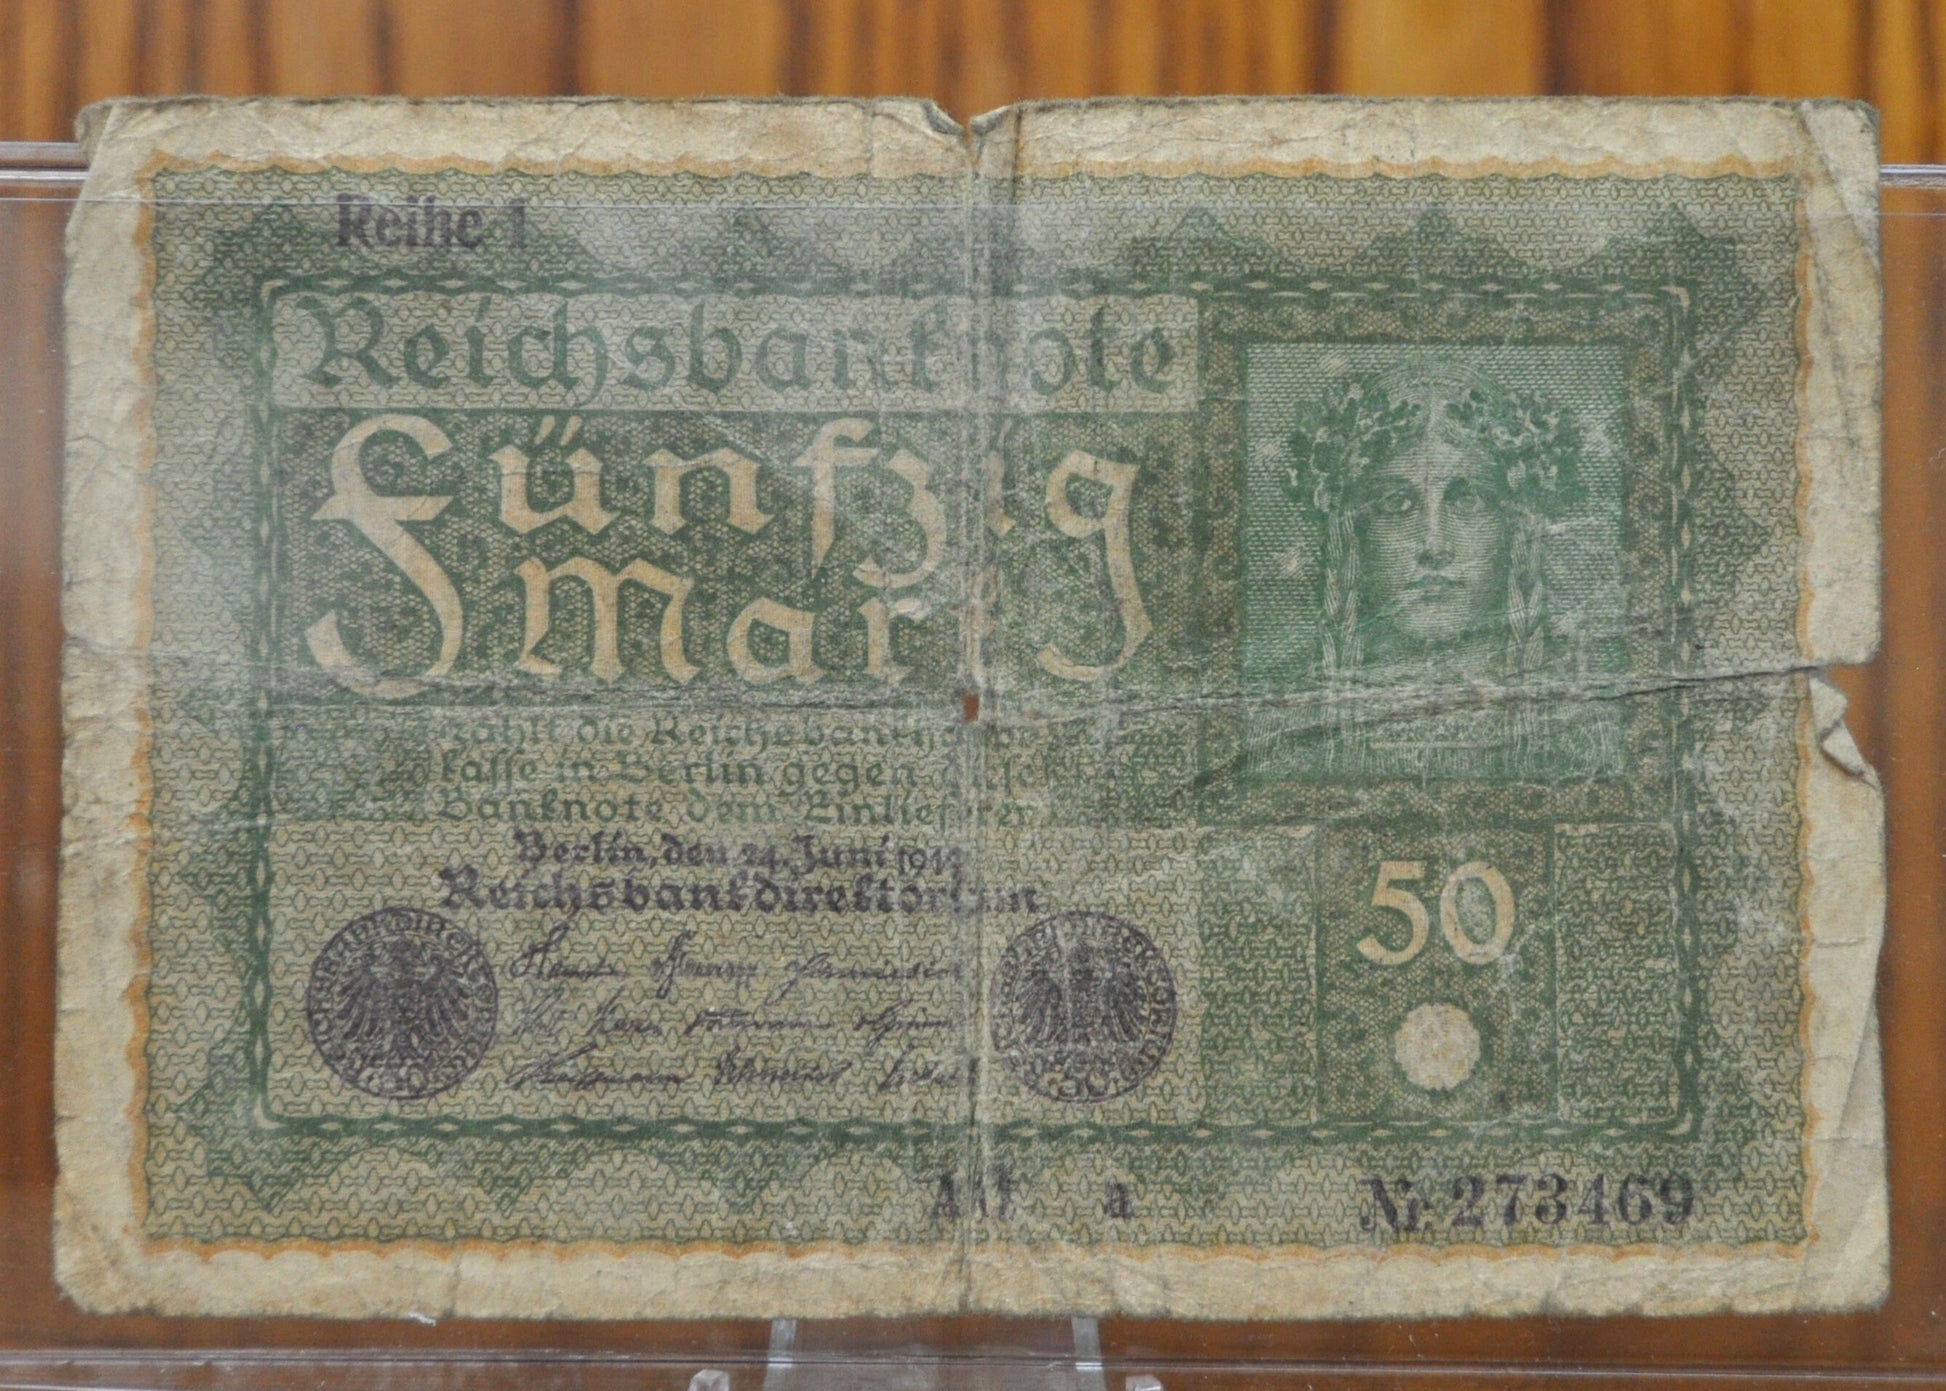 1919 50 Mark German Paper Note - 1919 Reichsbanknote 50 - Circulated Condition, Beautiful Design - Fifty Mark Note 1919